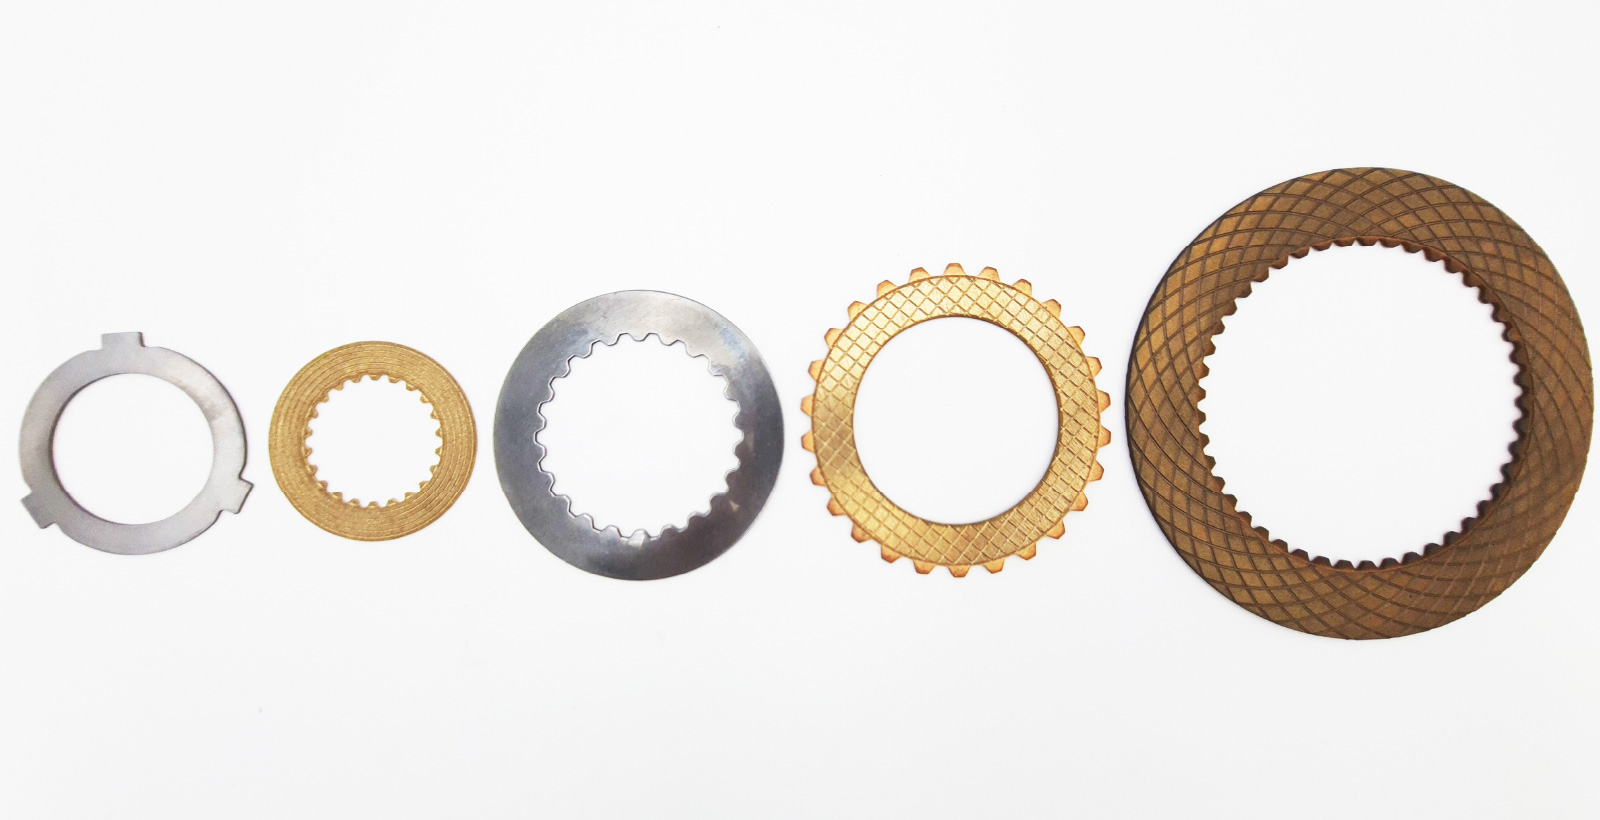 Iron Transmission Discs for Agricultural Industry